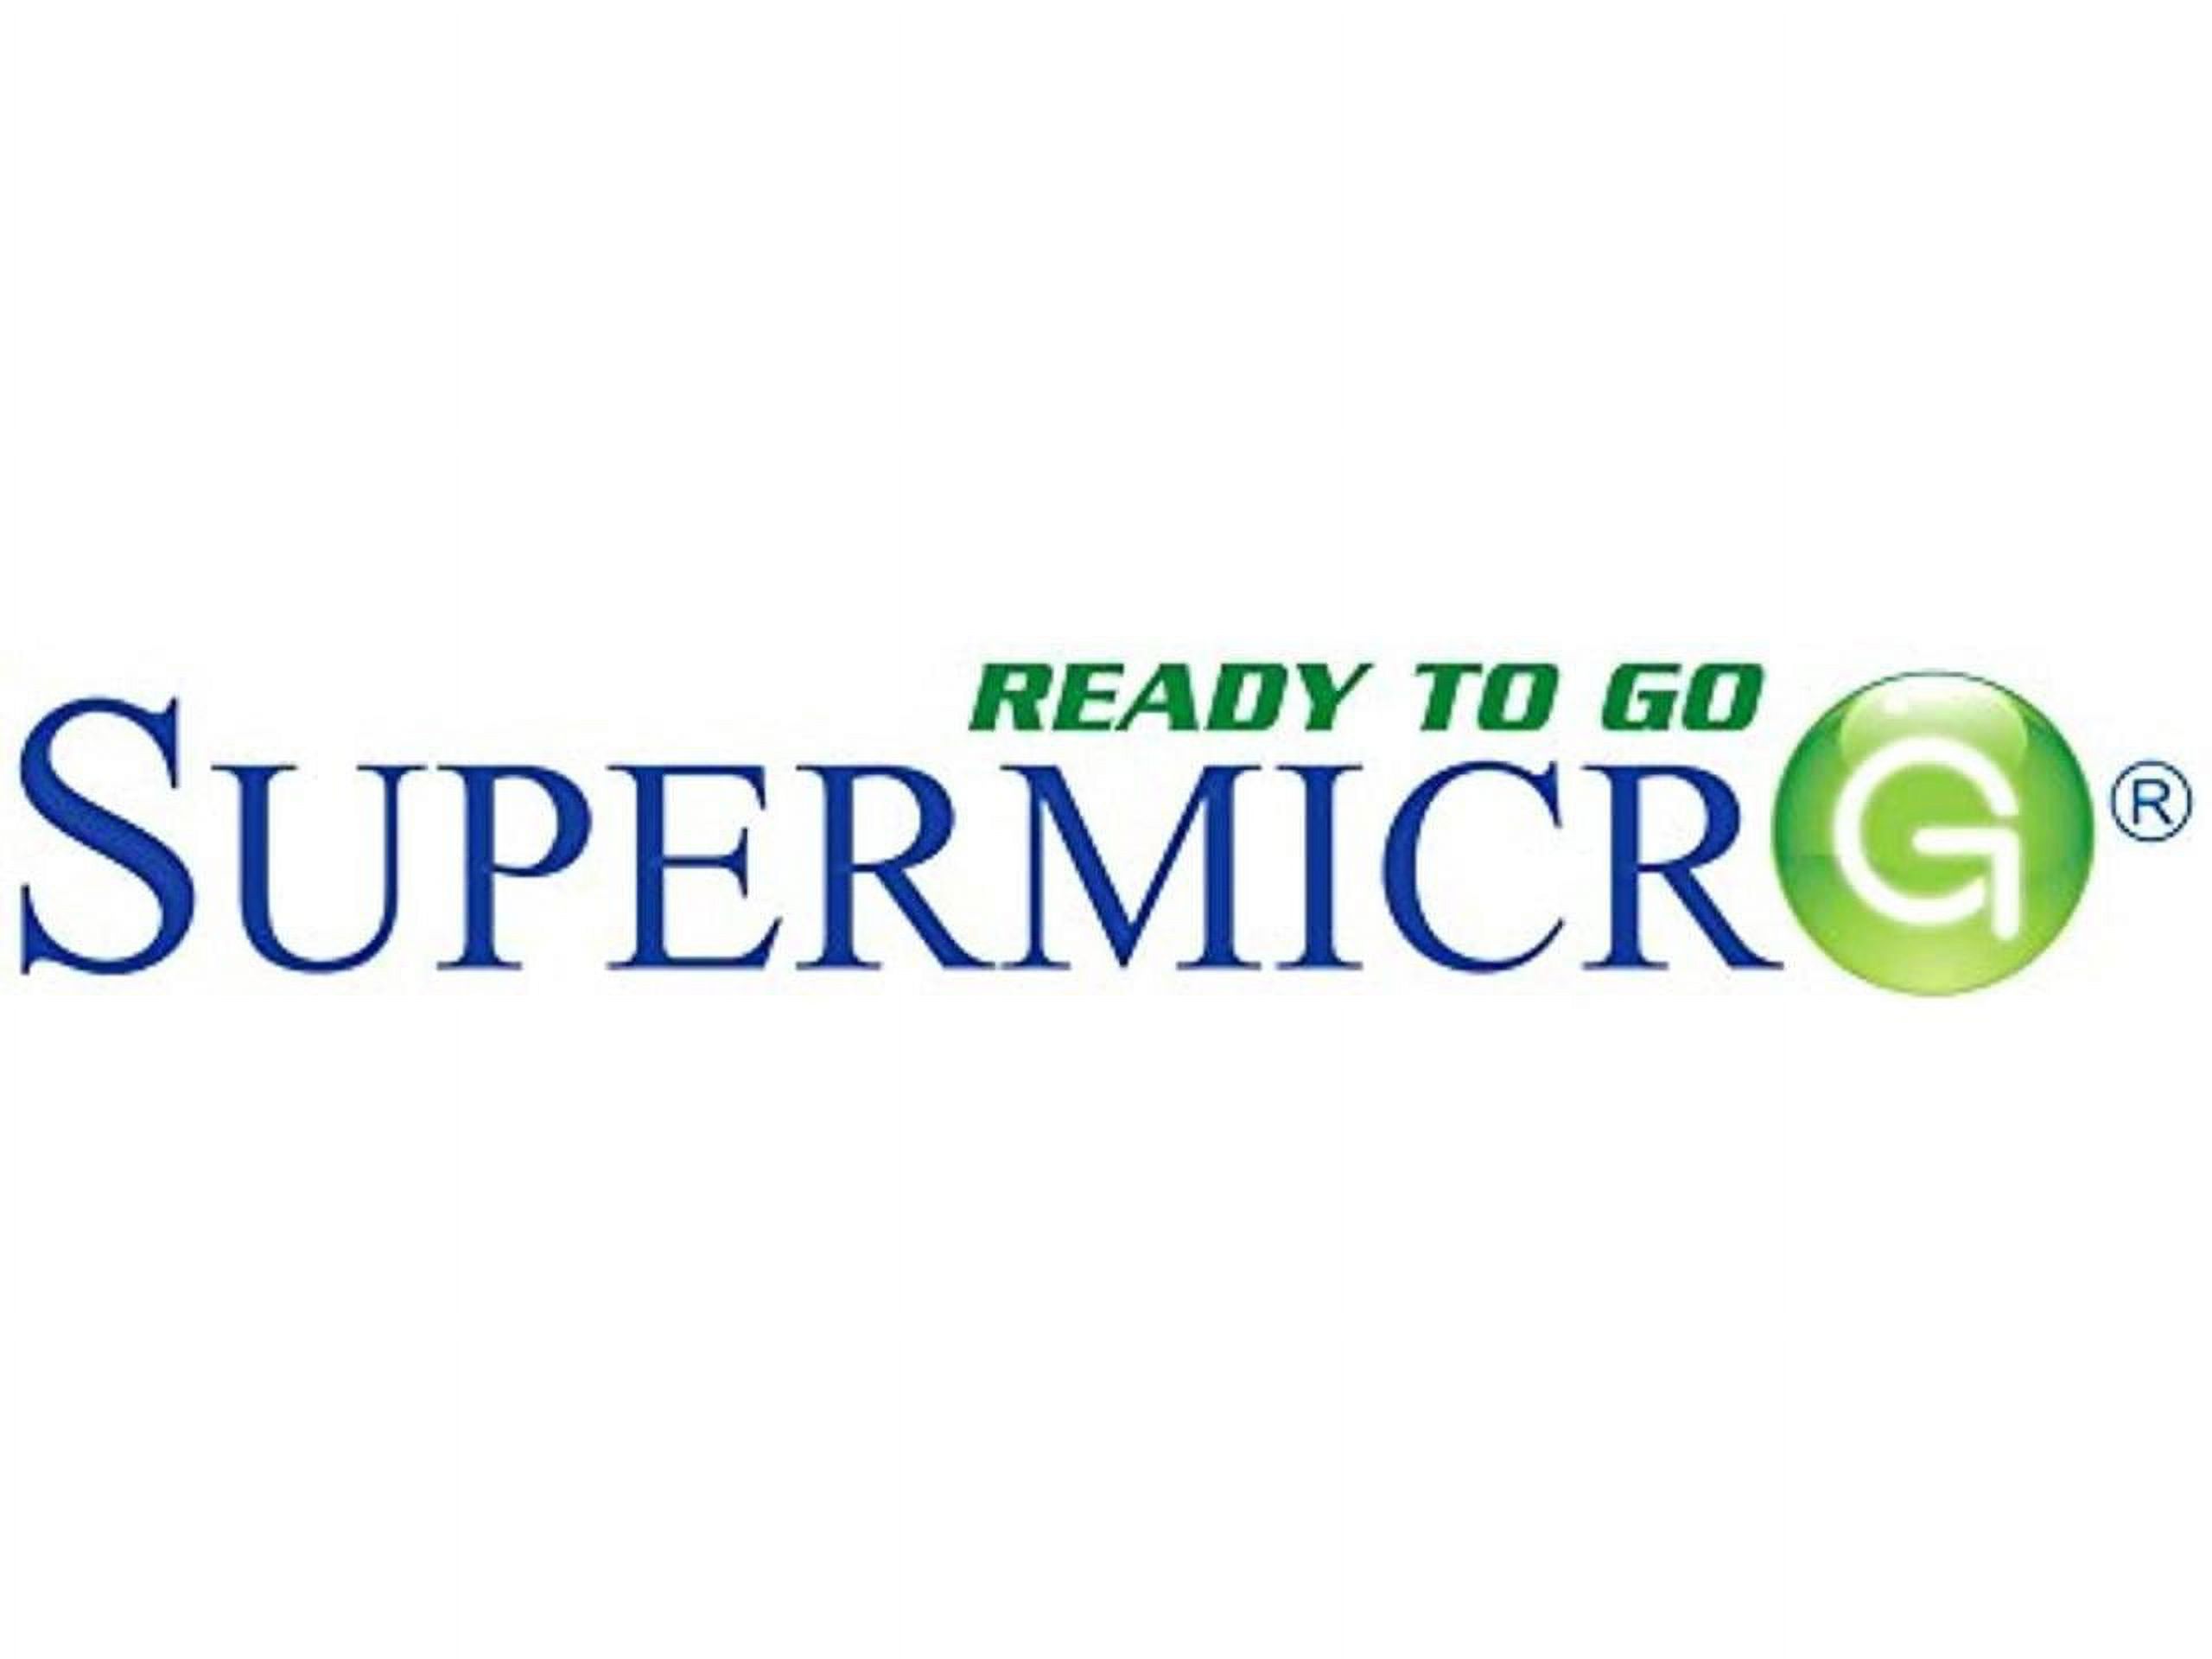 Supermicro SSD-DM064-SMCMVN1 64GB SATA Internal DOM, Server Device Supported 520MB/s Maximum Read Transfer Rate - image 5 of 11